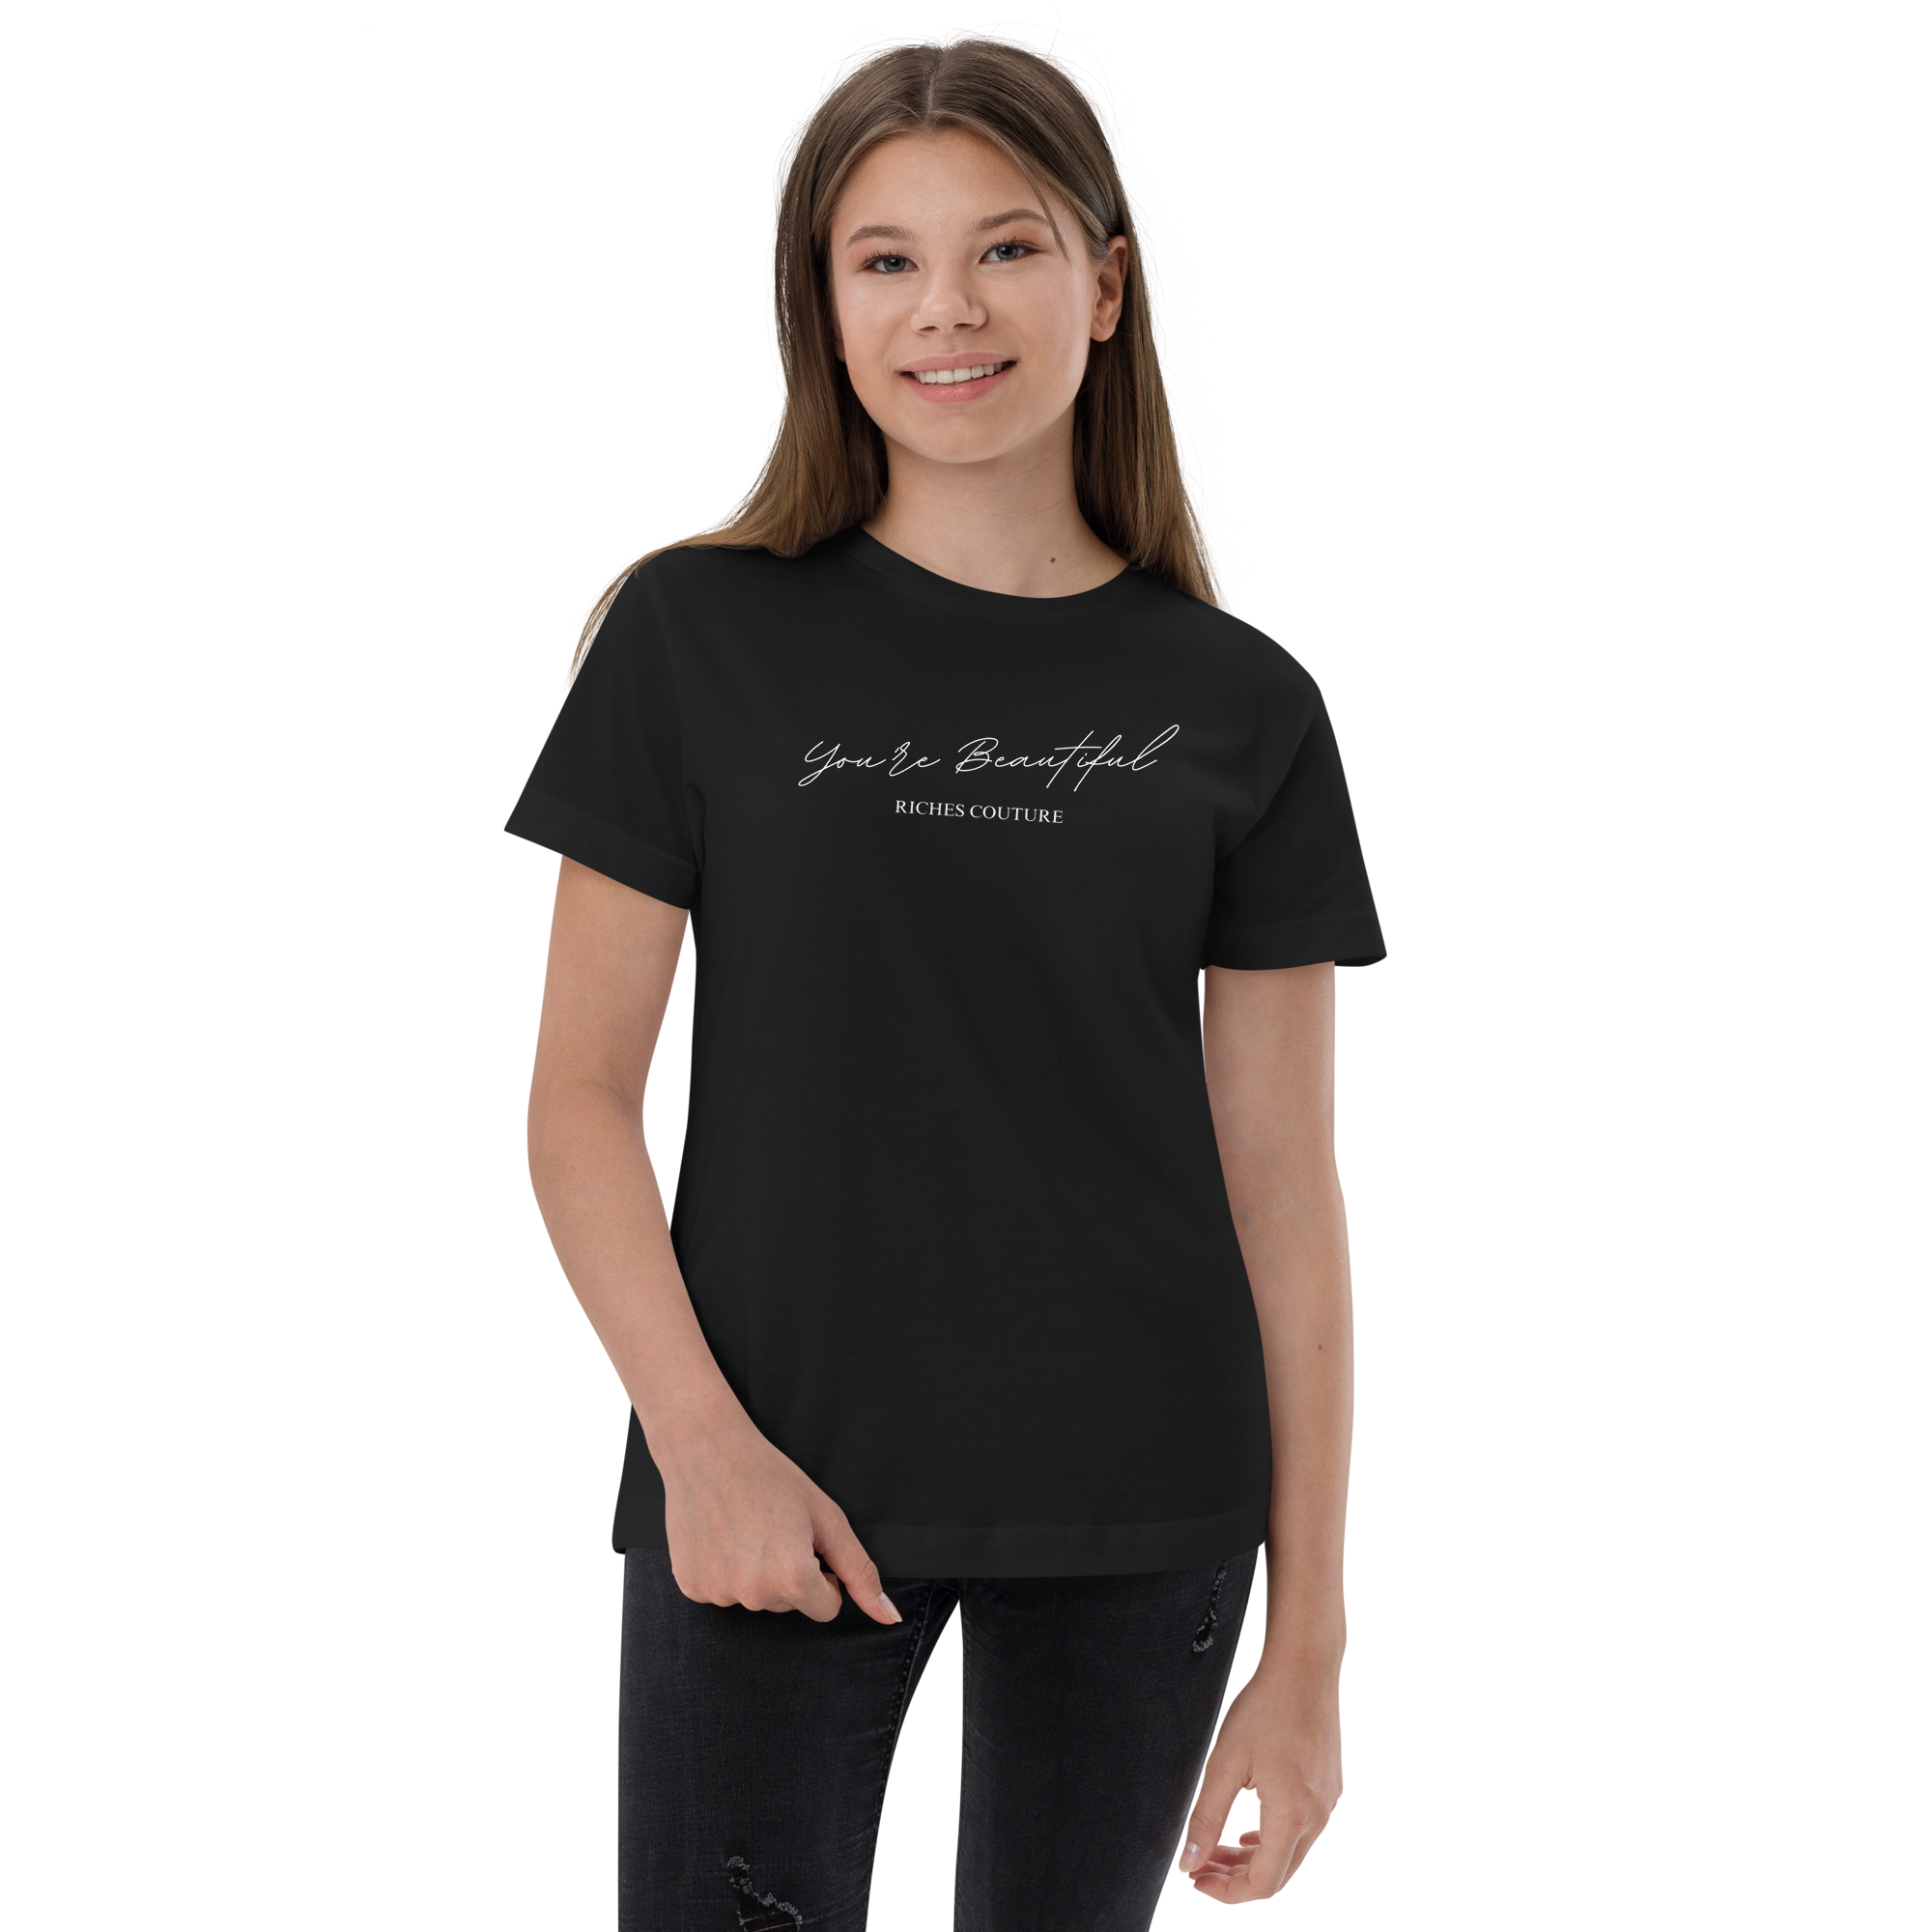 Riches Couture classic youth jersey t-shirt is soft and comfy